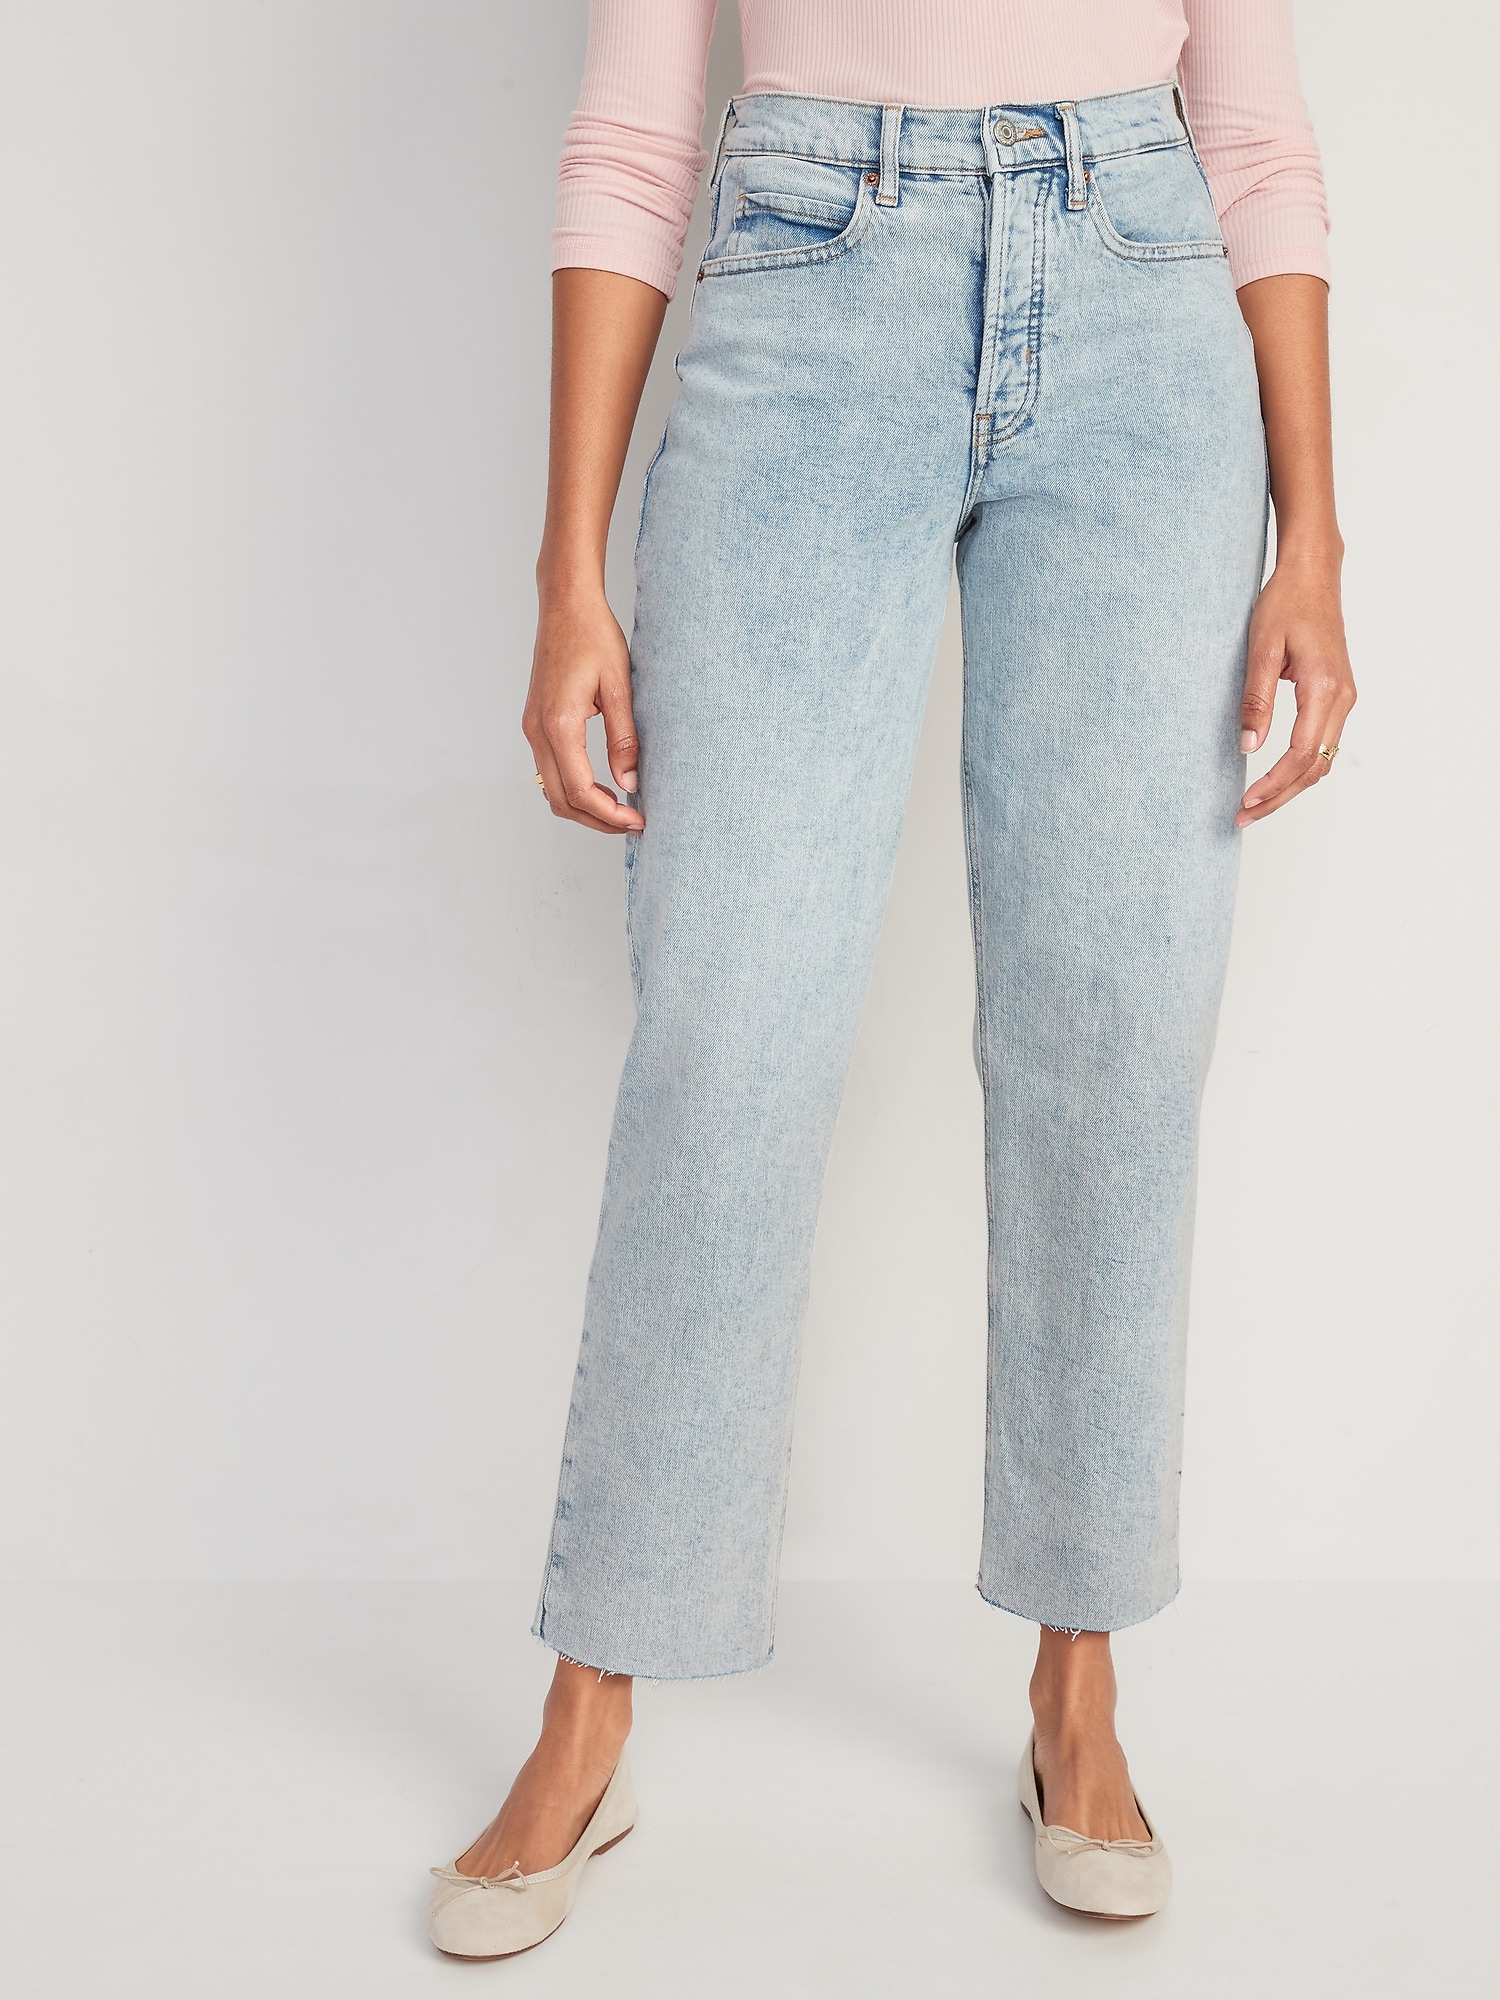 Sky High Straight Jeans | Old Navy